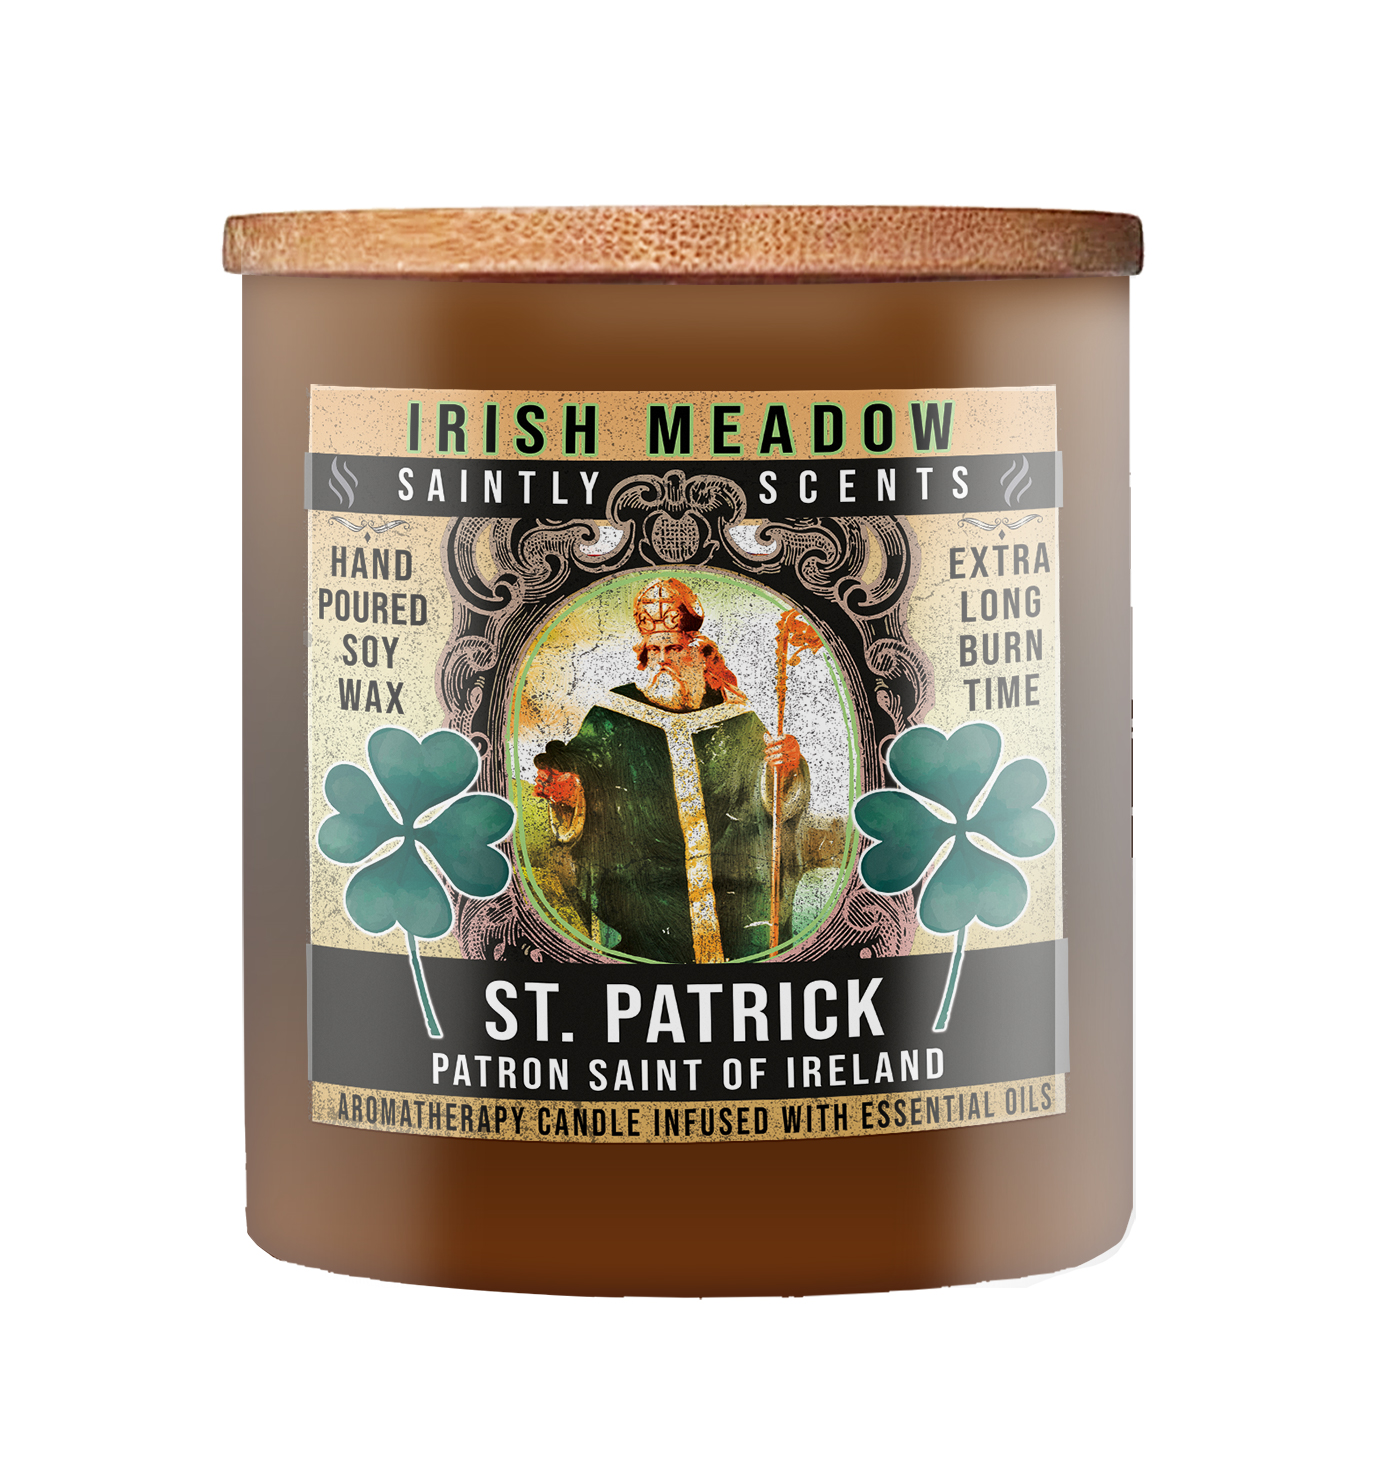 St. Patrick Irish Meadow Scented Candle